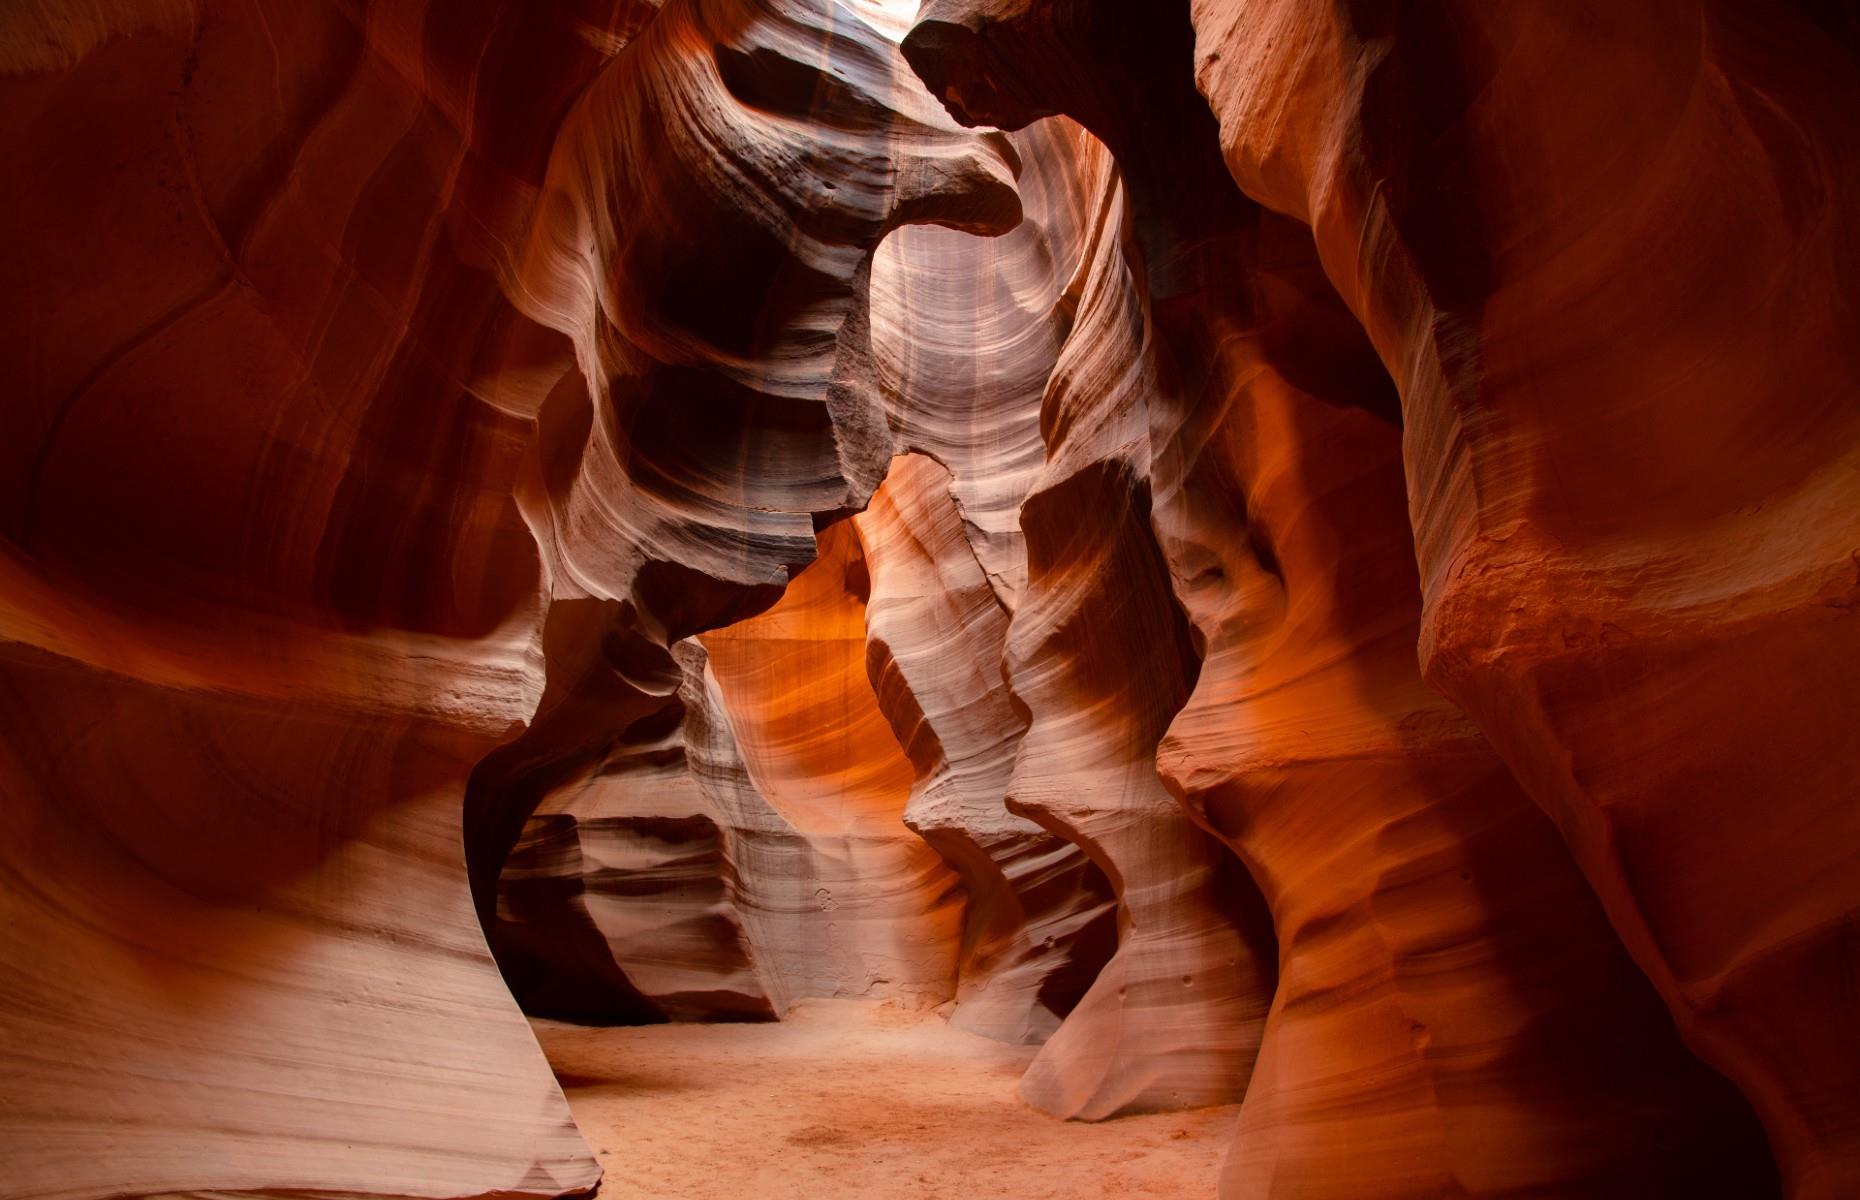 <p>From every angle, Antelope Canyon is totally mesmerizing, with its vivid crimson walls taking on myriad organic forms. The slot canyon, located on land belonging to the LeChee Chapter of the Navajo people, was formed over thousands of years by flash flooding carving into the sandstone. Forceful winds also hurled sand at its walls, creating the swirling shapes we see today. To experience it at its best, head down at midday to see the light pierce through the rock – you can book a tour to walk through it, although bear in mind the canyon is just eight to 12 feet (2.4–3.7m) wide in places. </p>